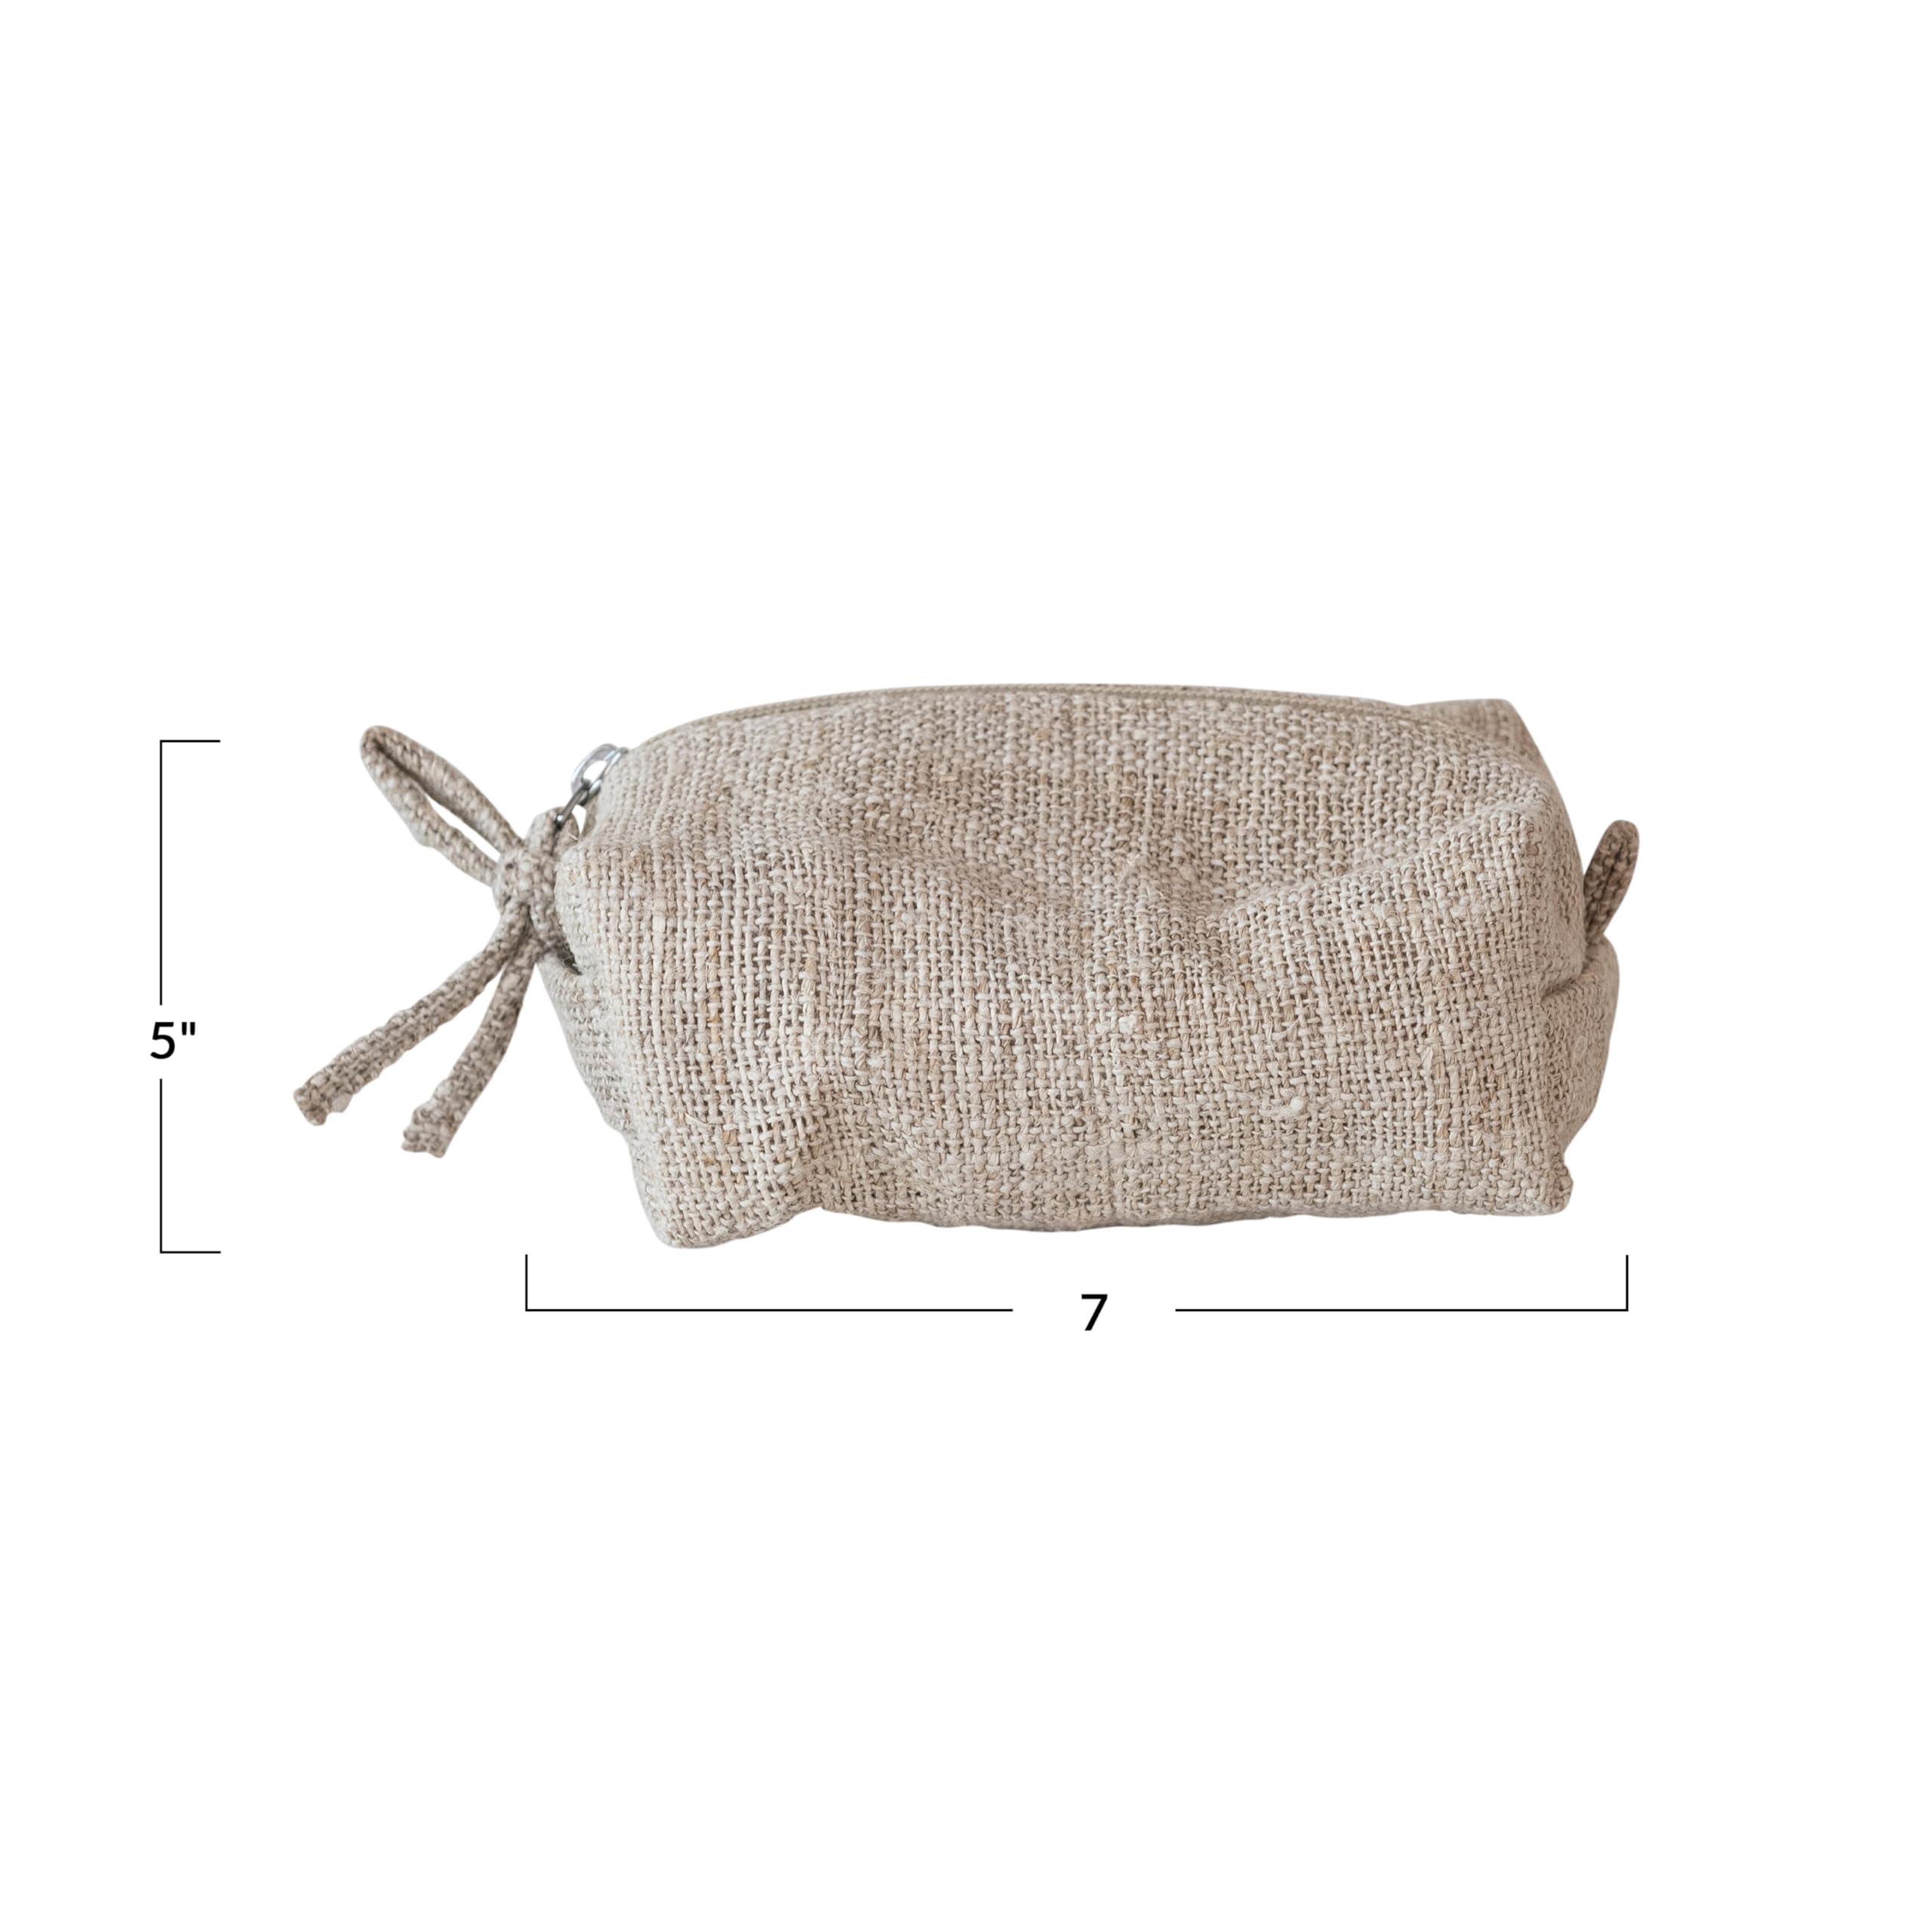 Creative Co-Op Woven Hemp Fiber Zip Pouch with Handle and Cotton Lining, Natural